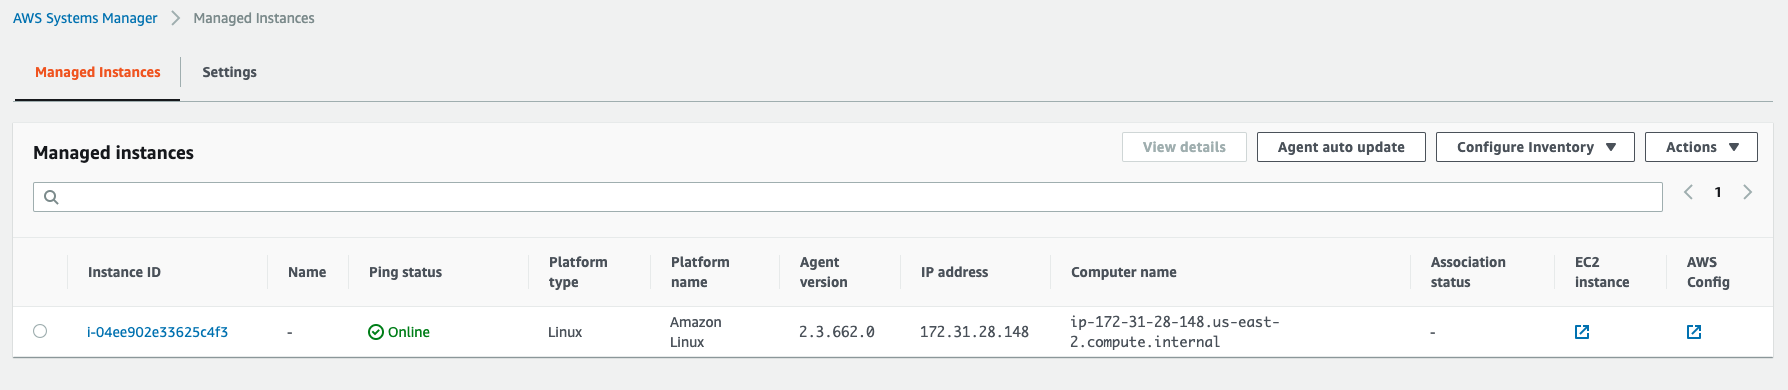 AWS Session Manager - Managed instances